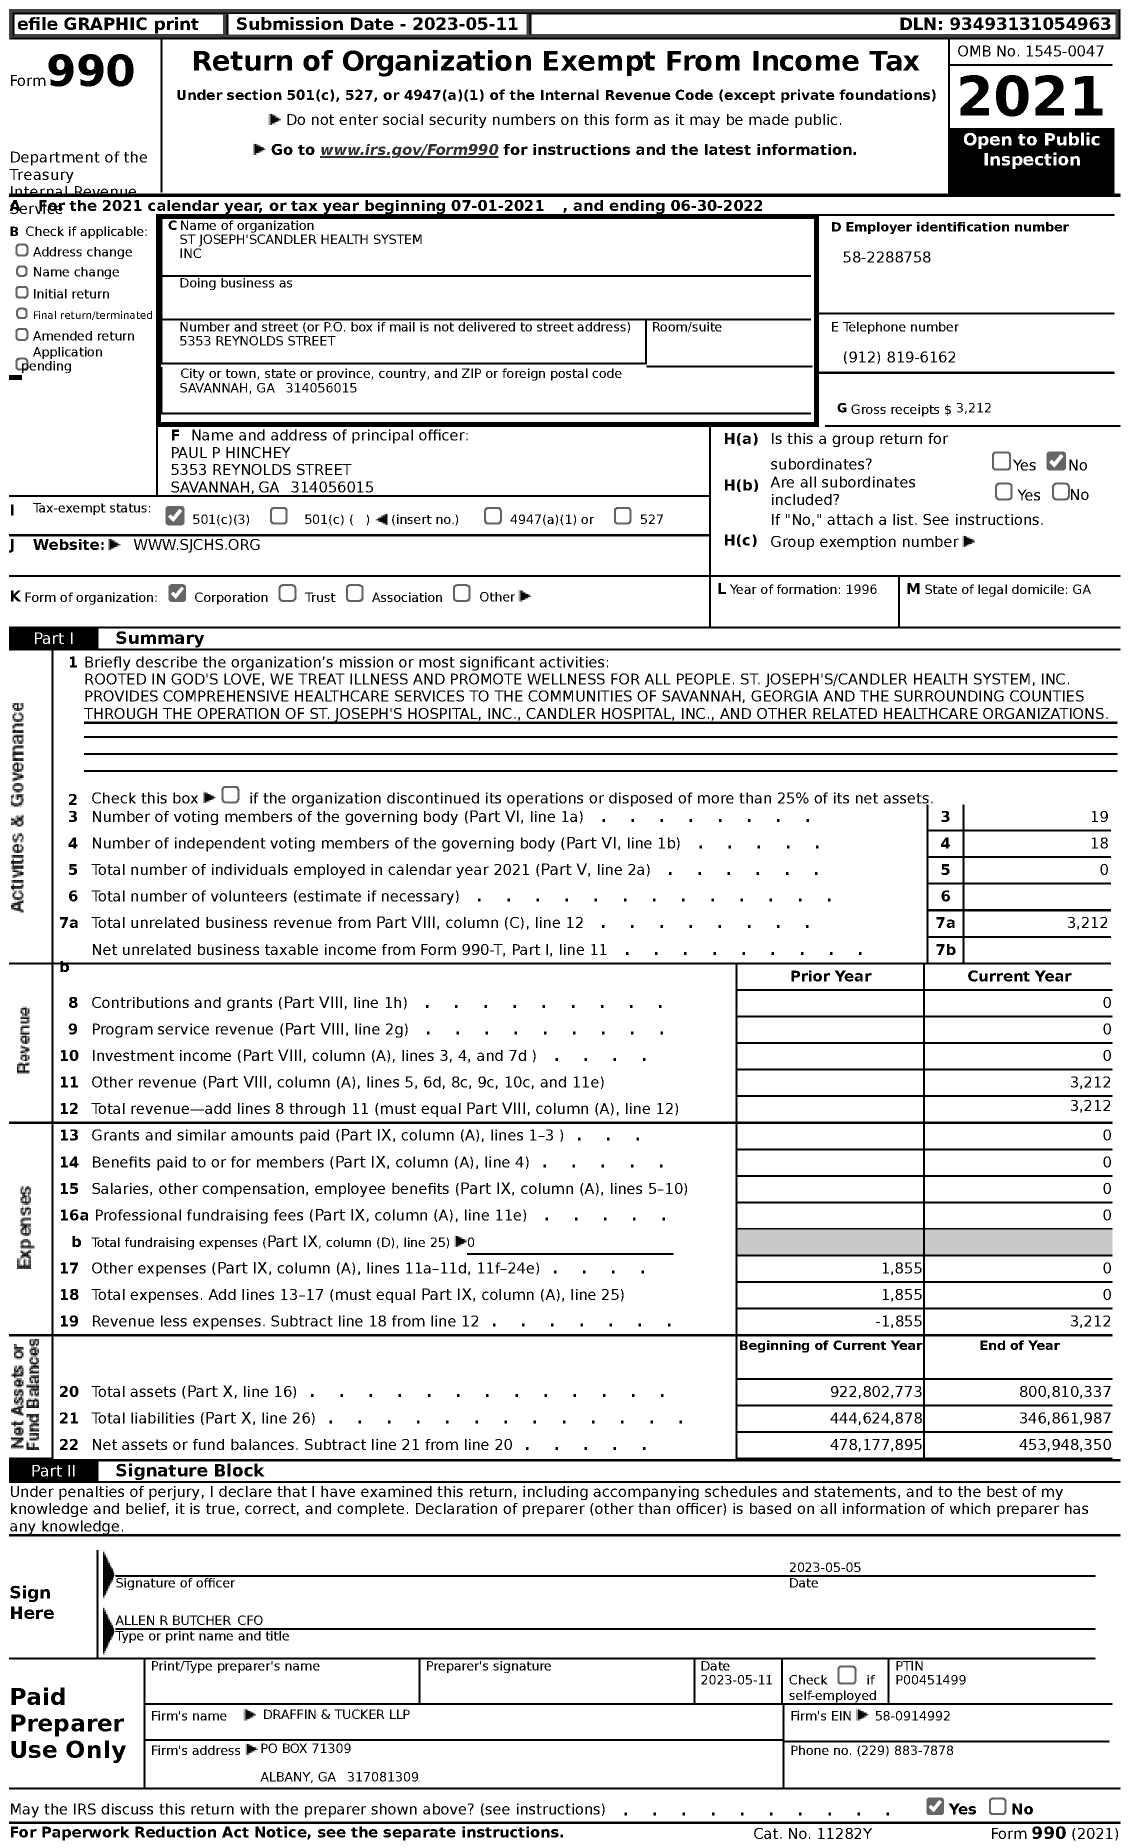 Image of first page of 2021 Form 990 for St Joseph'scandler Health System